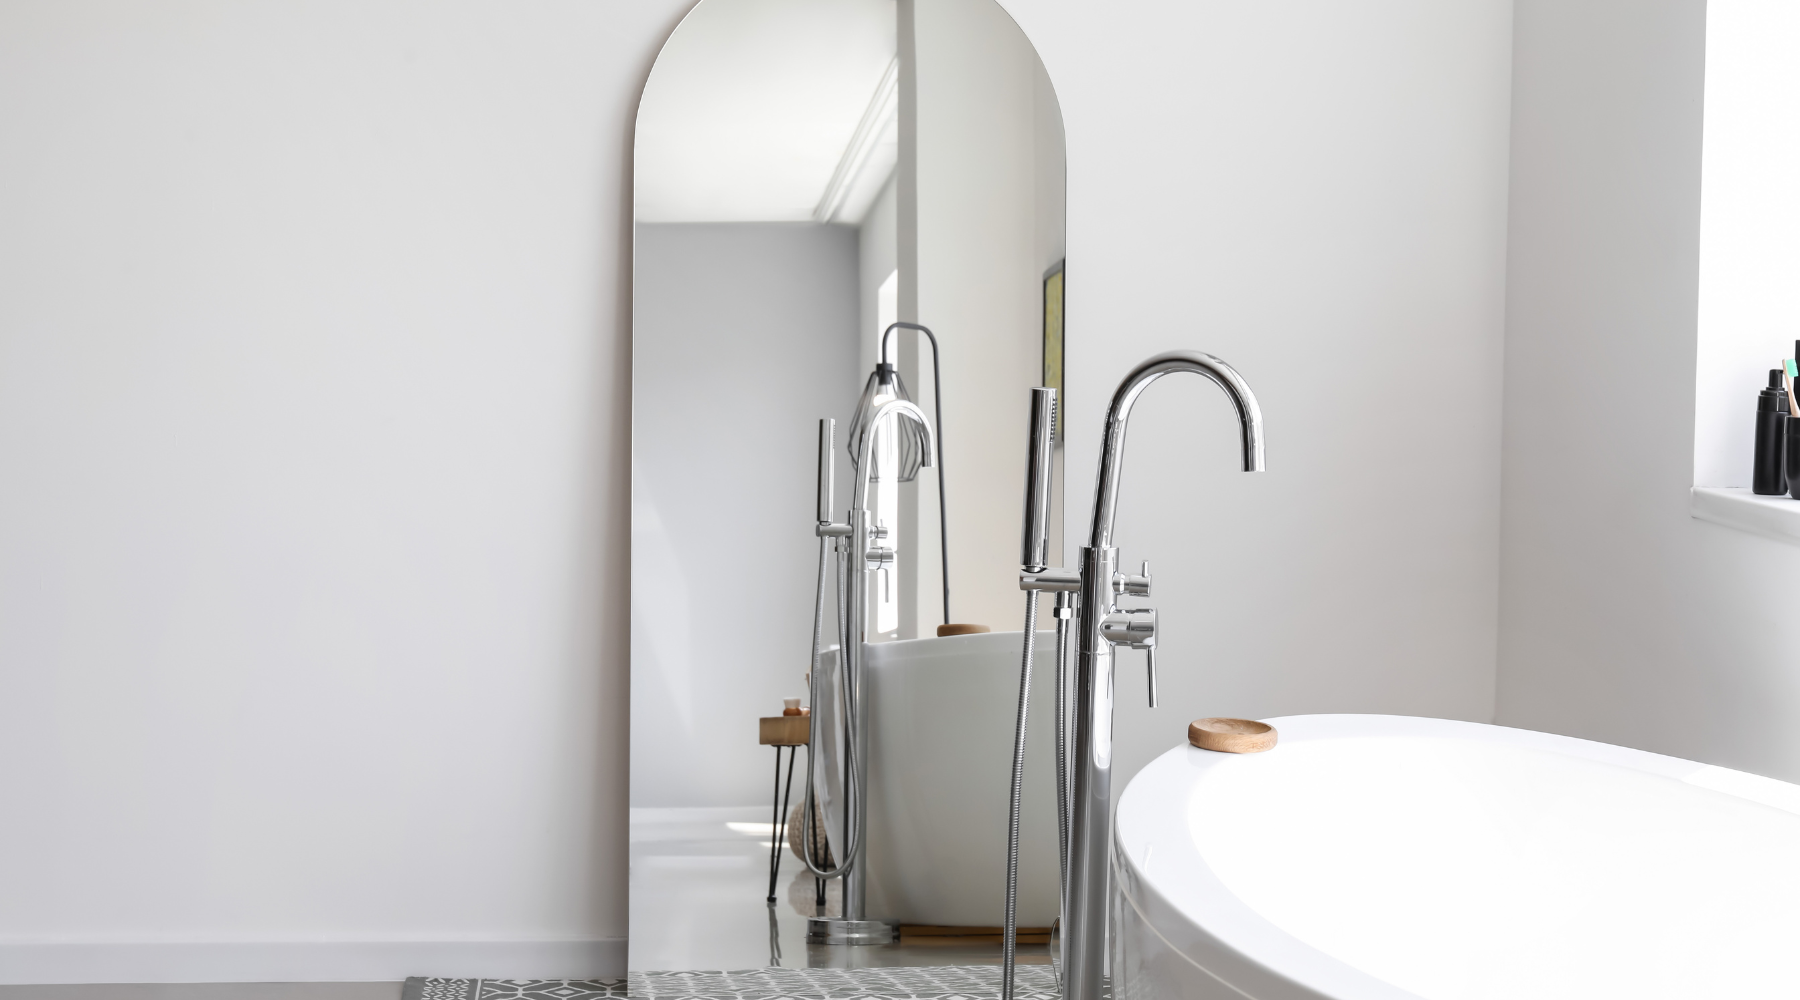 Free-standing leaner arch mirror in a bathroom next to a free-standing bath.